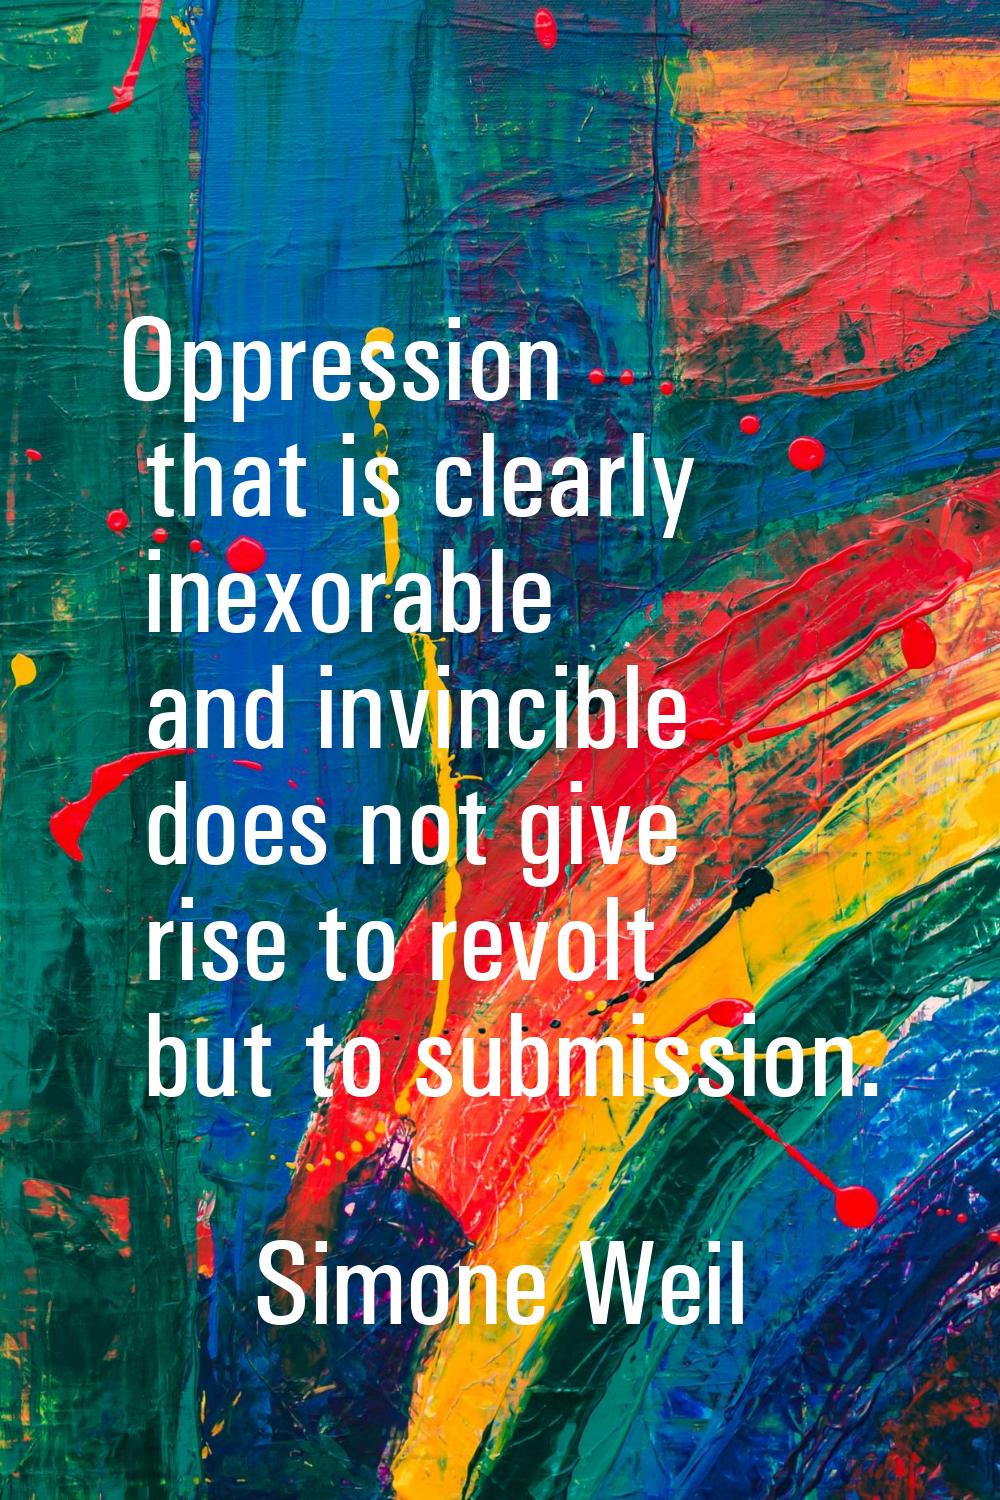 Oppression that is clearly inexorable and invincible does not give rise to revolt but to submission